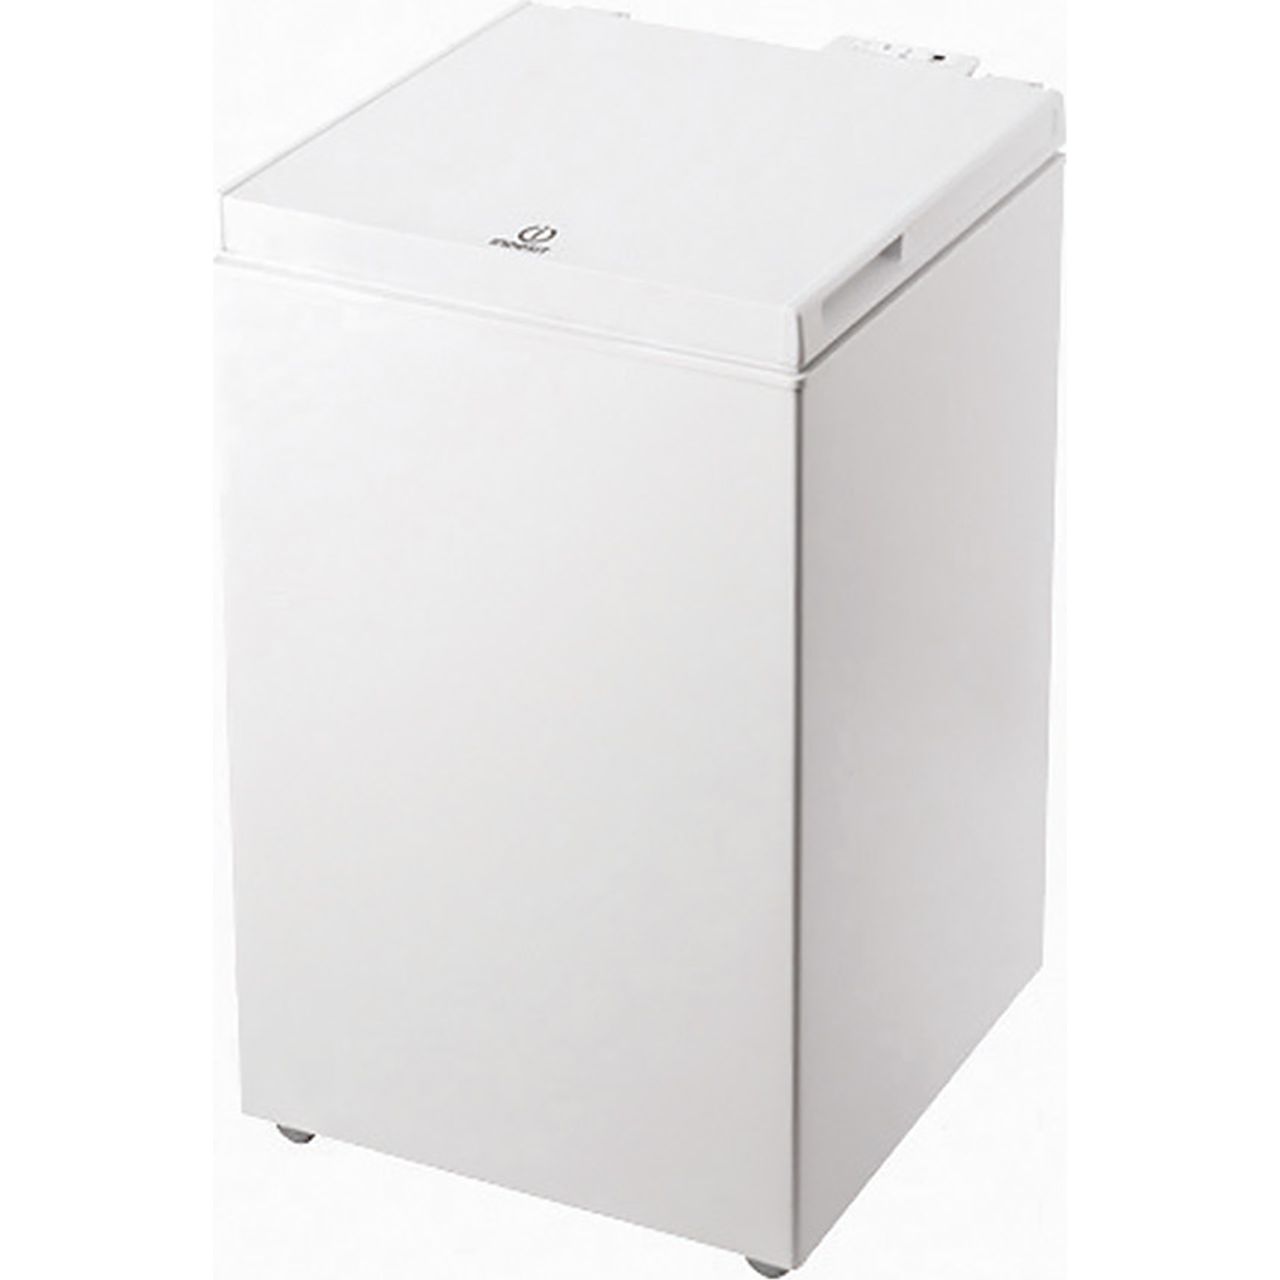 Indesit OS1A1002UK2 Chest Freezer Review